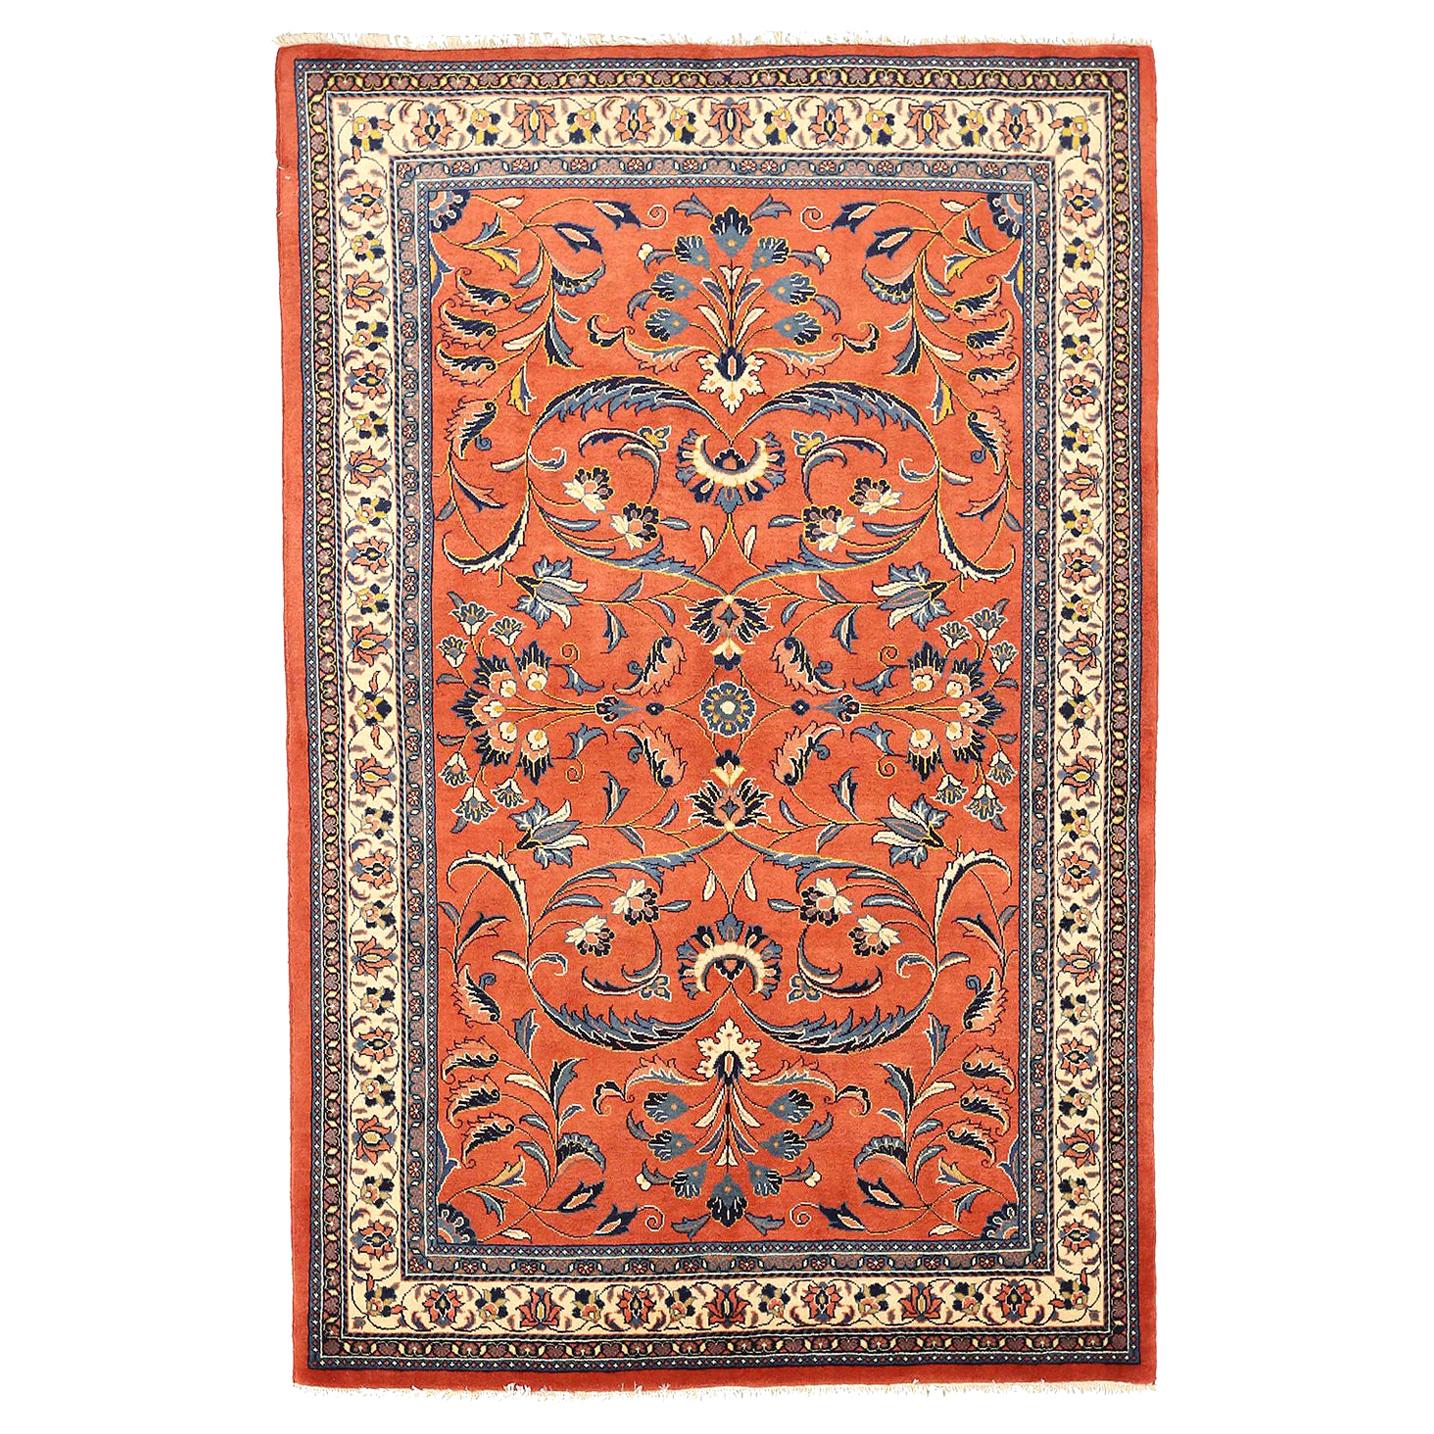 Antique Persian Sarouk Rug with Blue and Ivory Floral Details on Orange Field For Sale